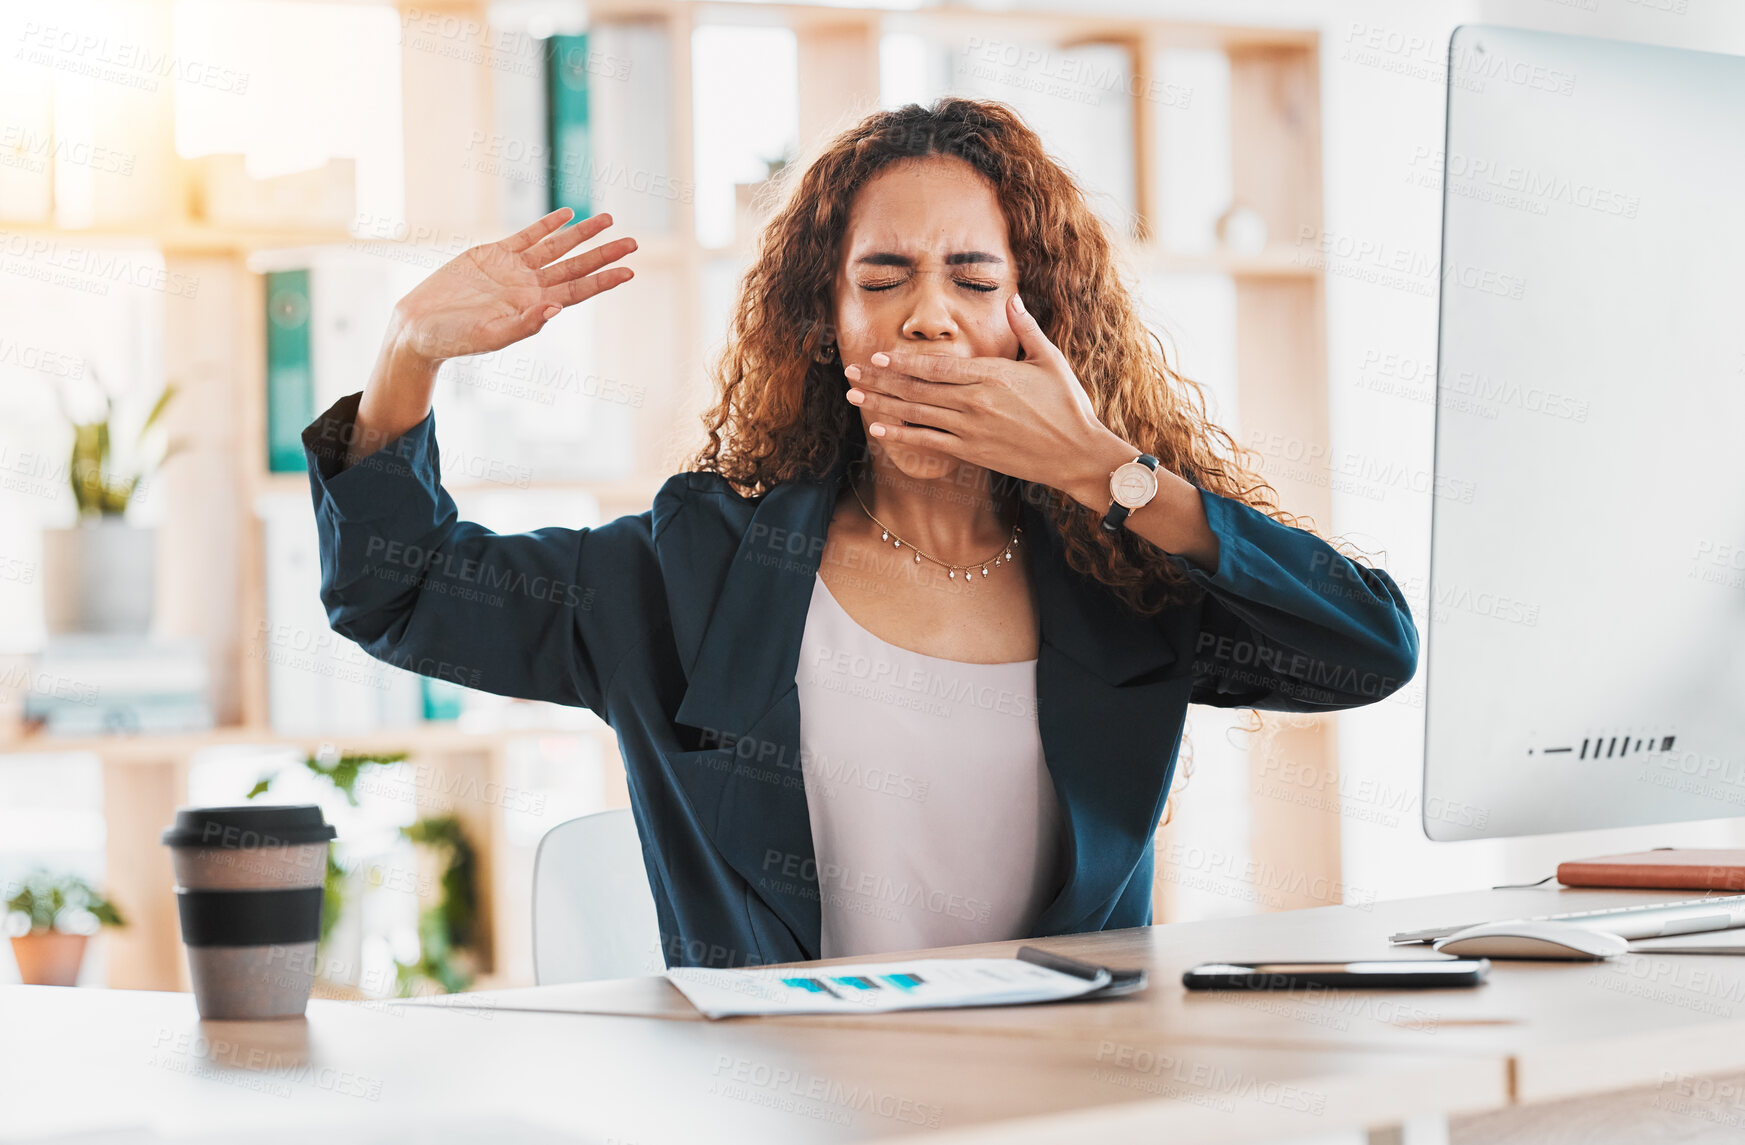 Buy stock photo Tired, yawn and business woman at desk in office feeling exhausted, overworked and low energy. Lazy, sleepy and stretching female worker with burnout, fatigue and bored with job in startup company 